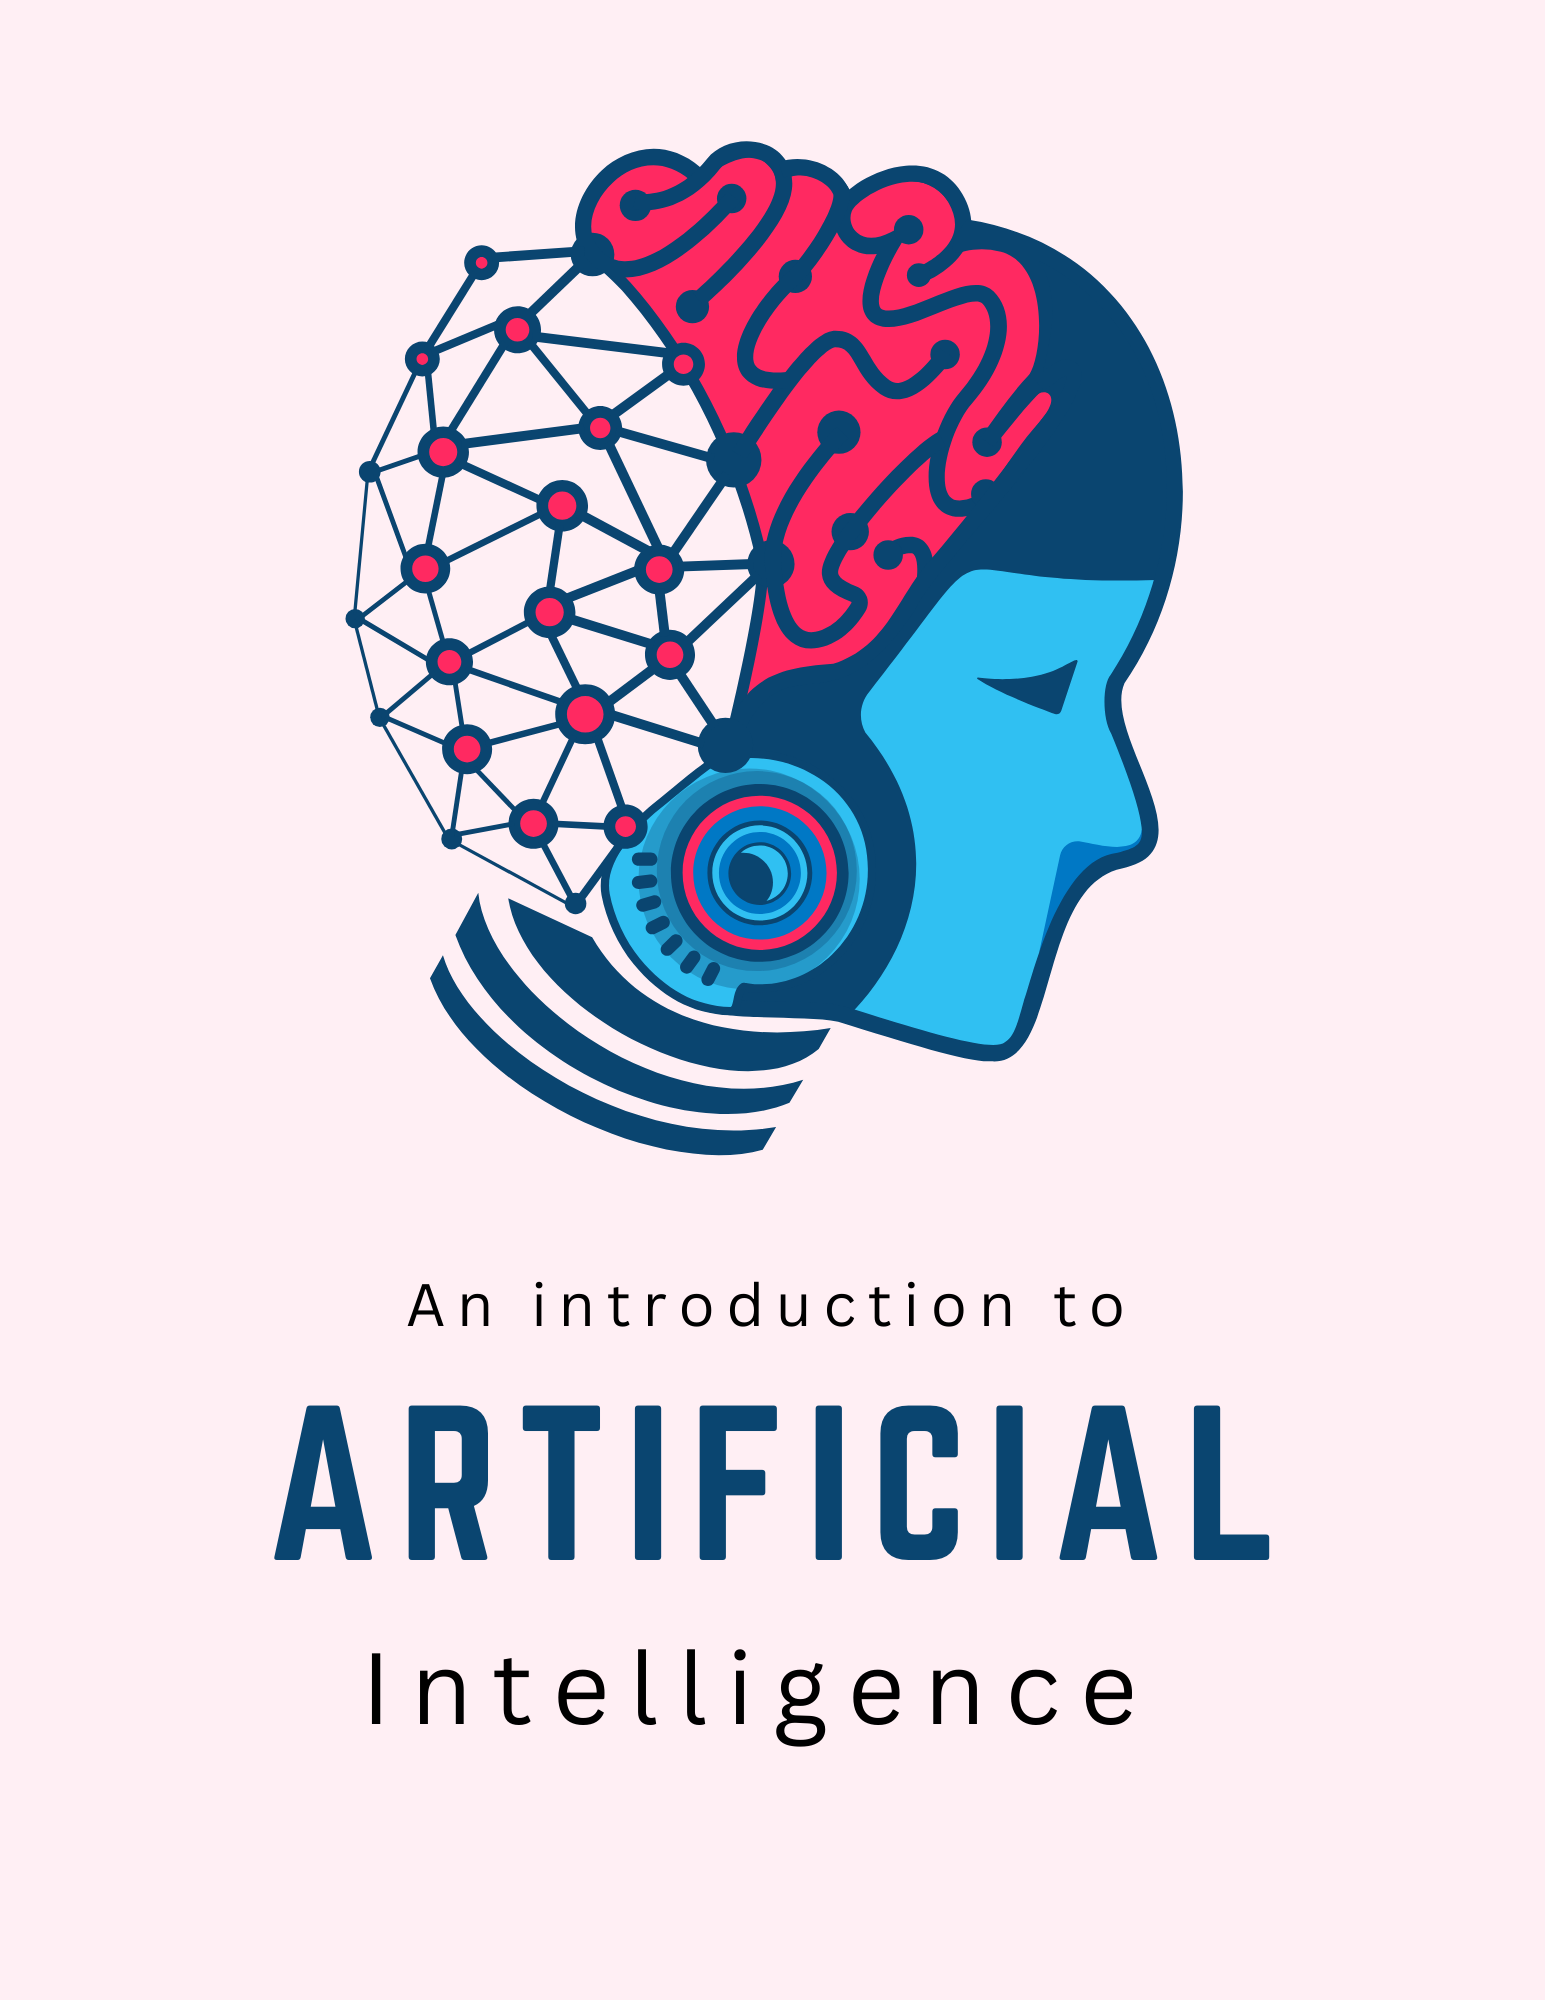 Introduction to Artificial Intelligence, Profile of a Person's skull with neural connections